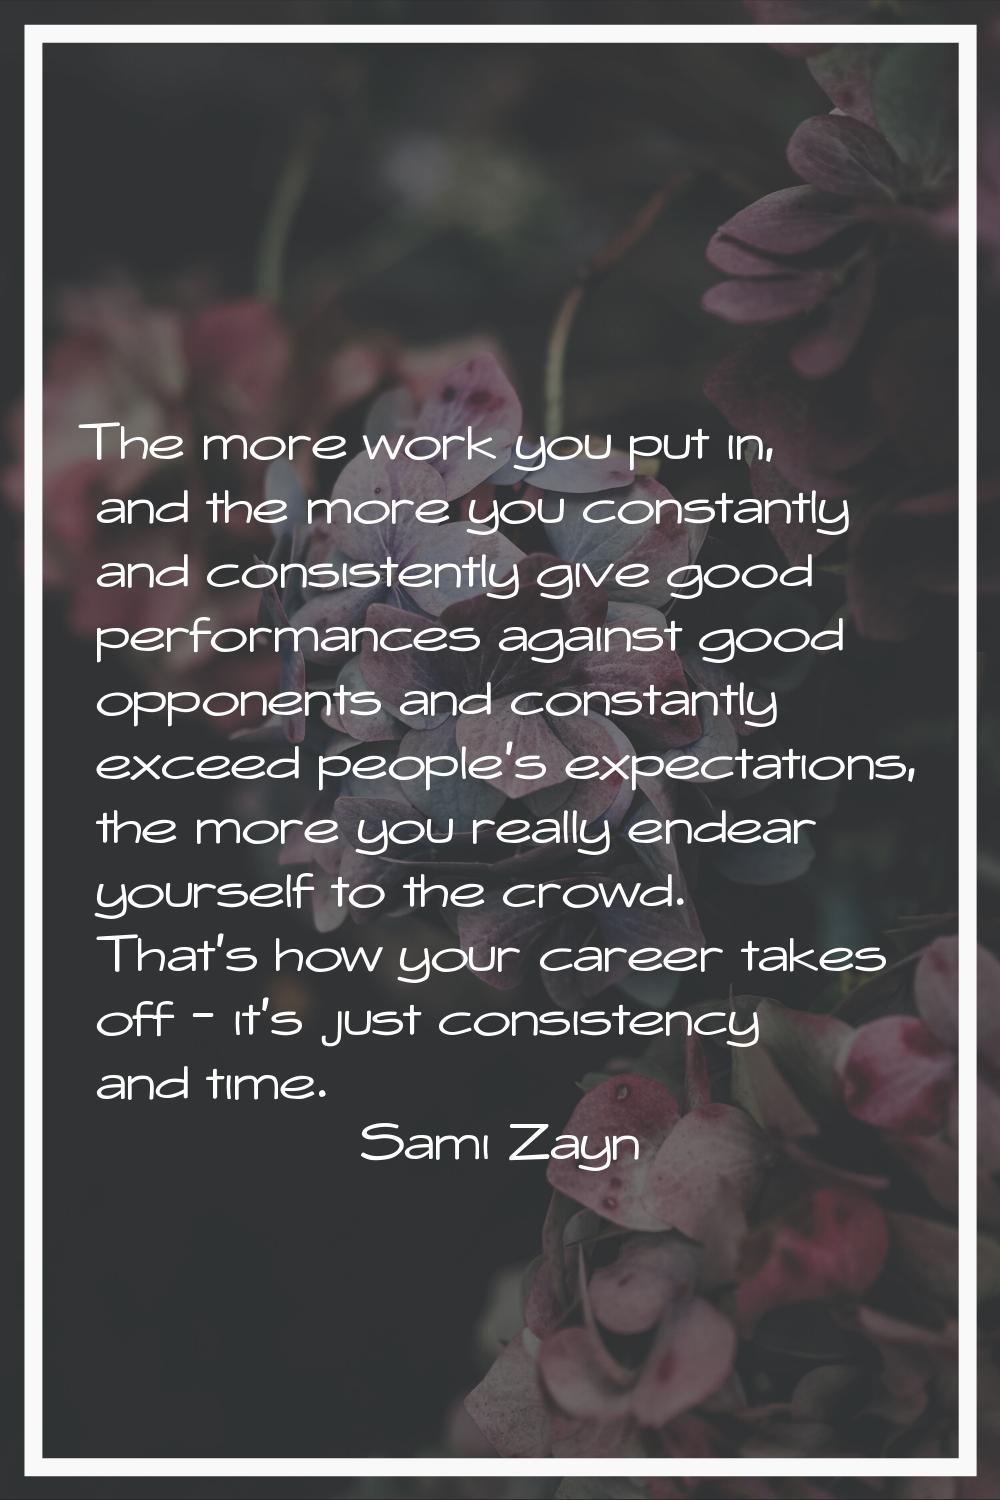 The more work you put in, and the more you constantly and consistently give good performances again